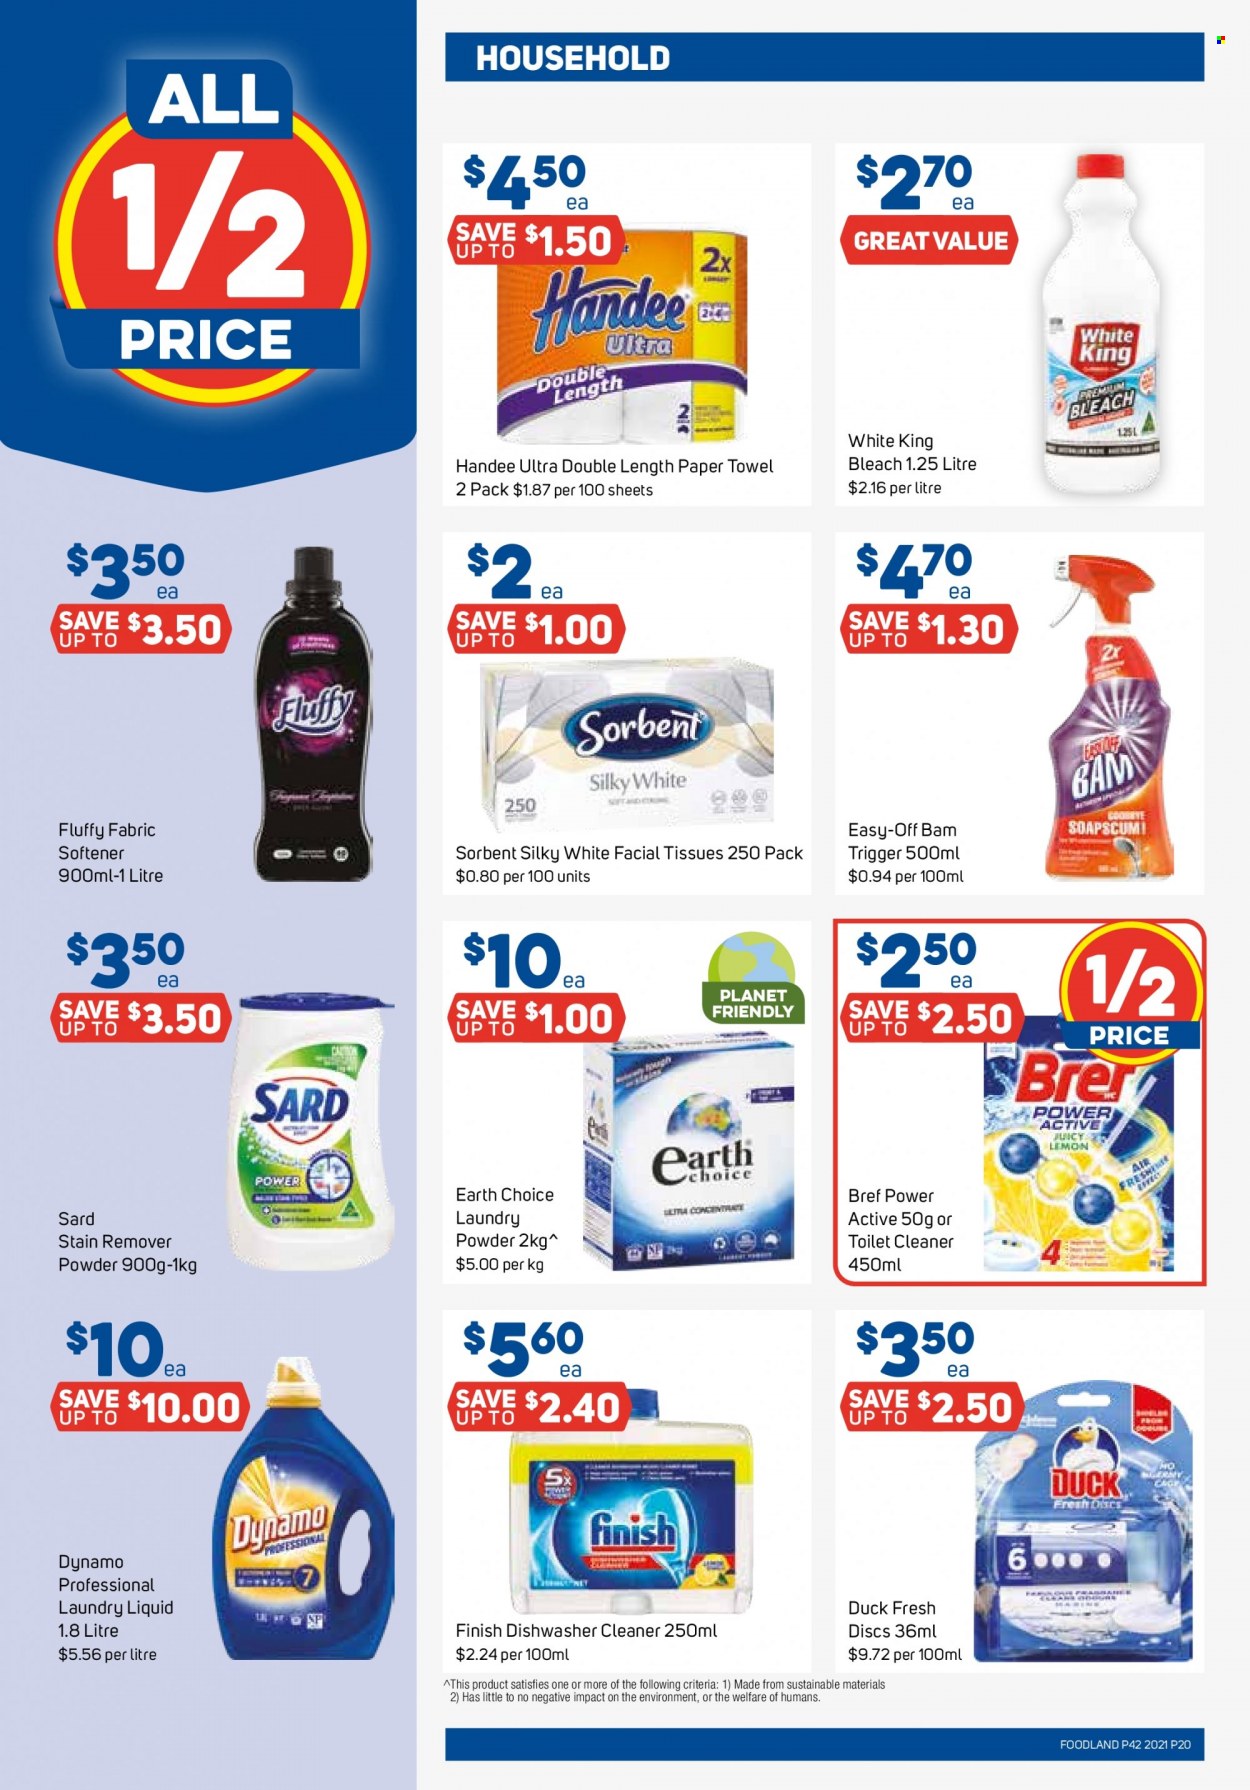 thumbnail - Foodland Catalogue - 13 Oct 2021 - 19 Oct 2021 - Sales products - tissues, Handee, paper towels, cleaner, bleach, toilet cleaner, stain remover, Bref Power, fabric softener, laundry powder, laundry detergent, dishwashing liquid, dishwasher cleaner, facial tissues. Page 20.